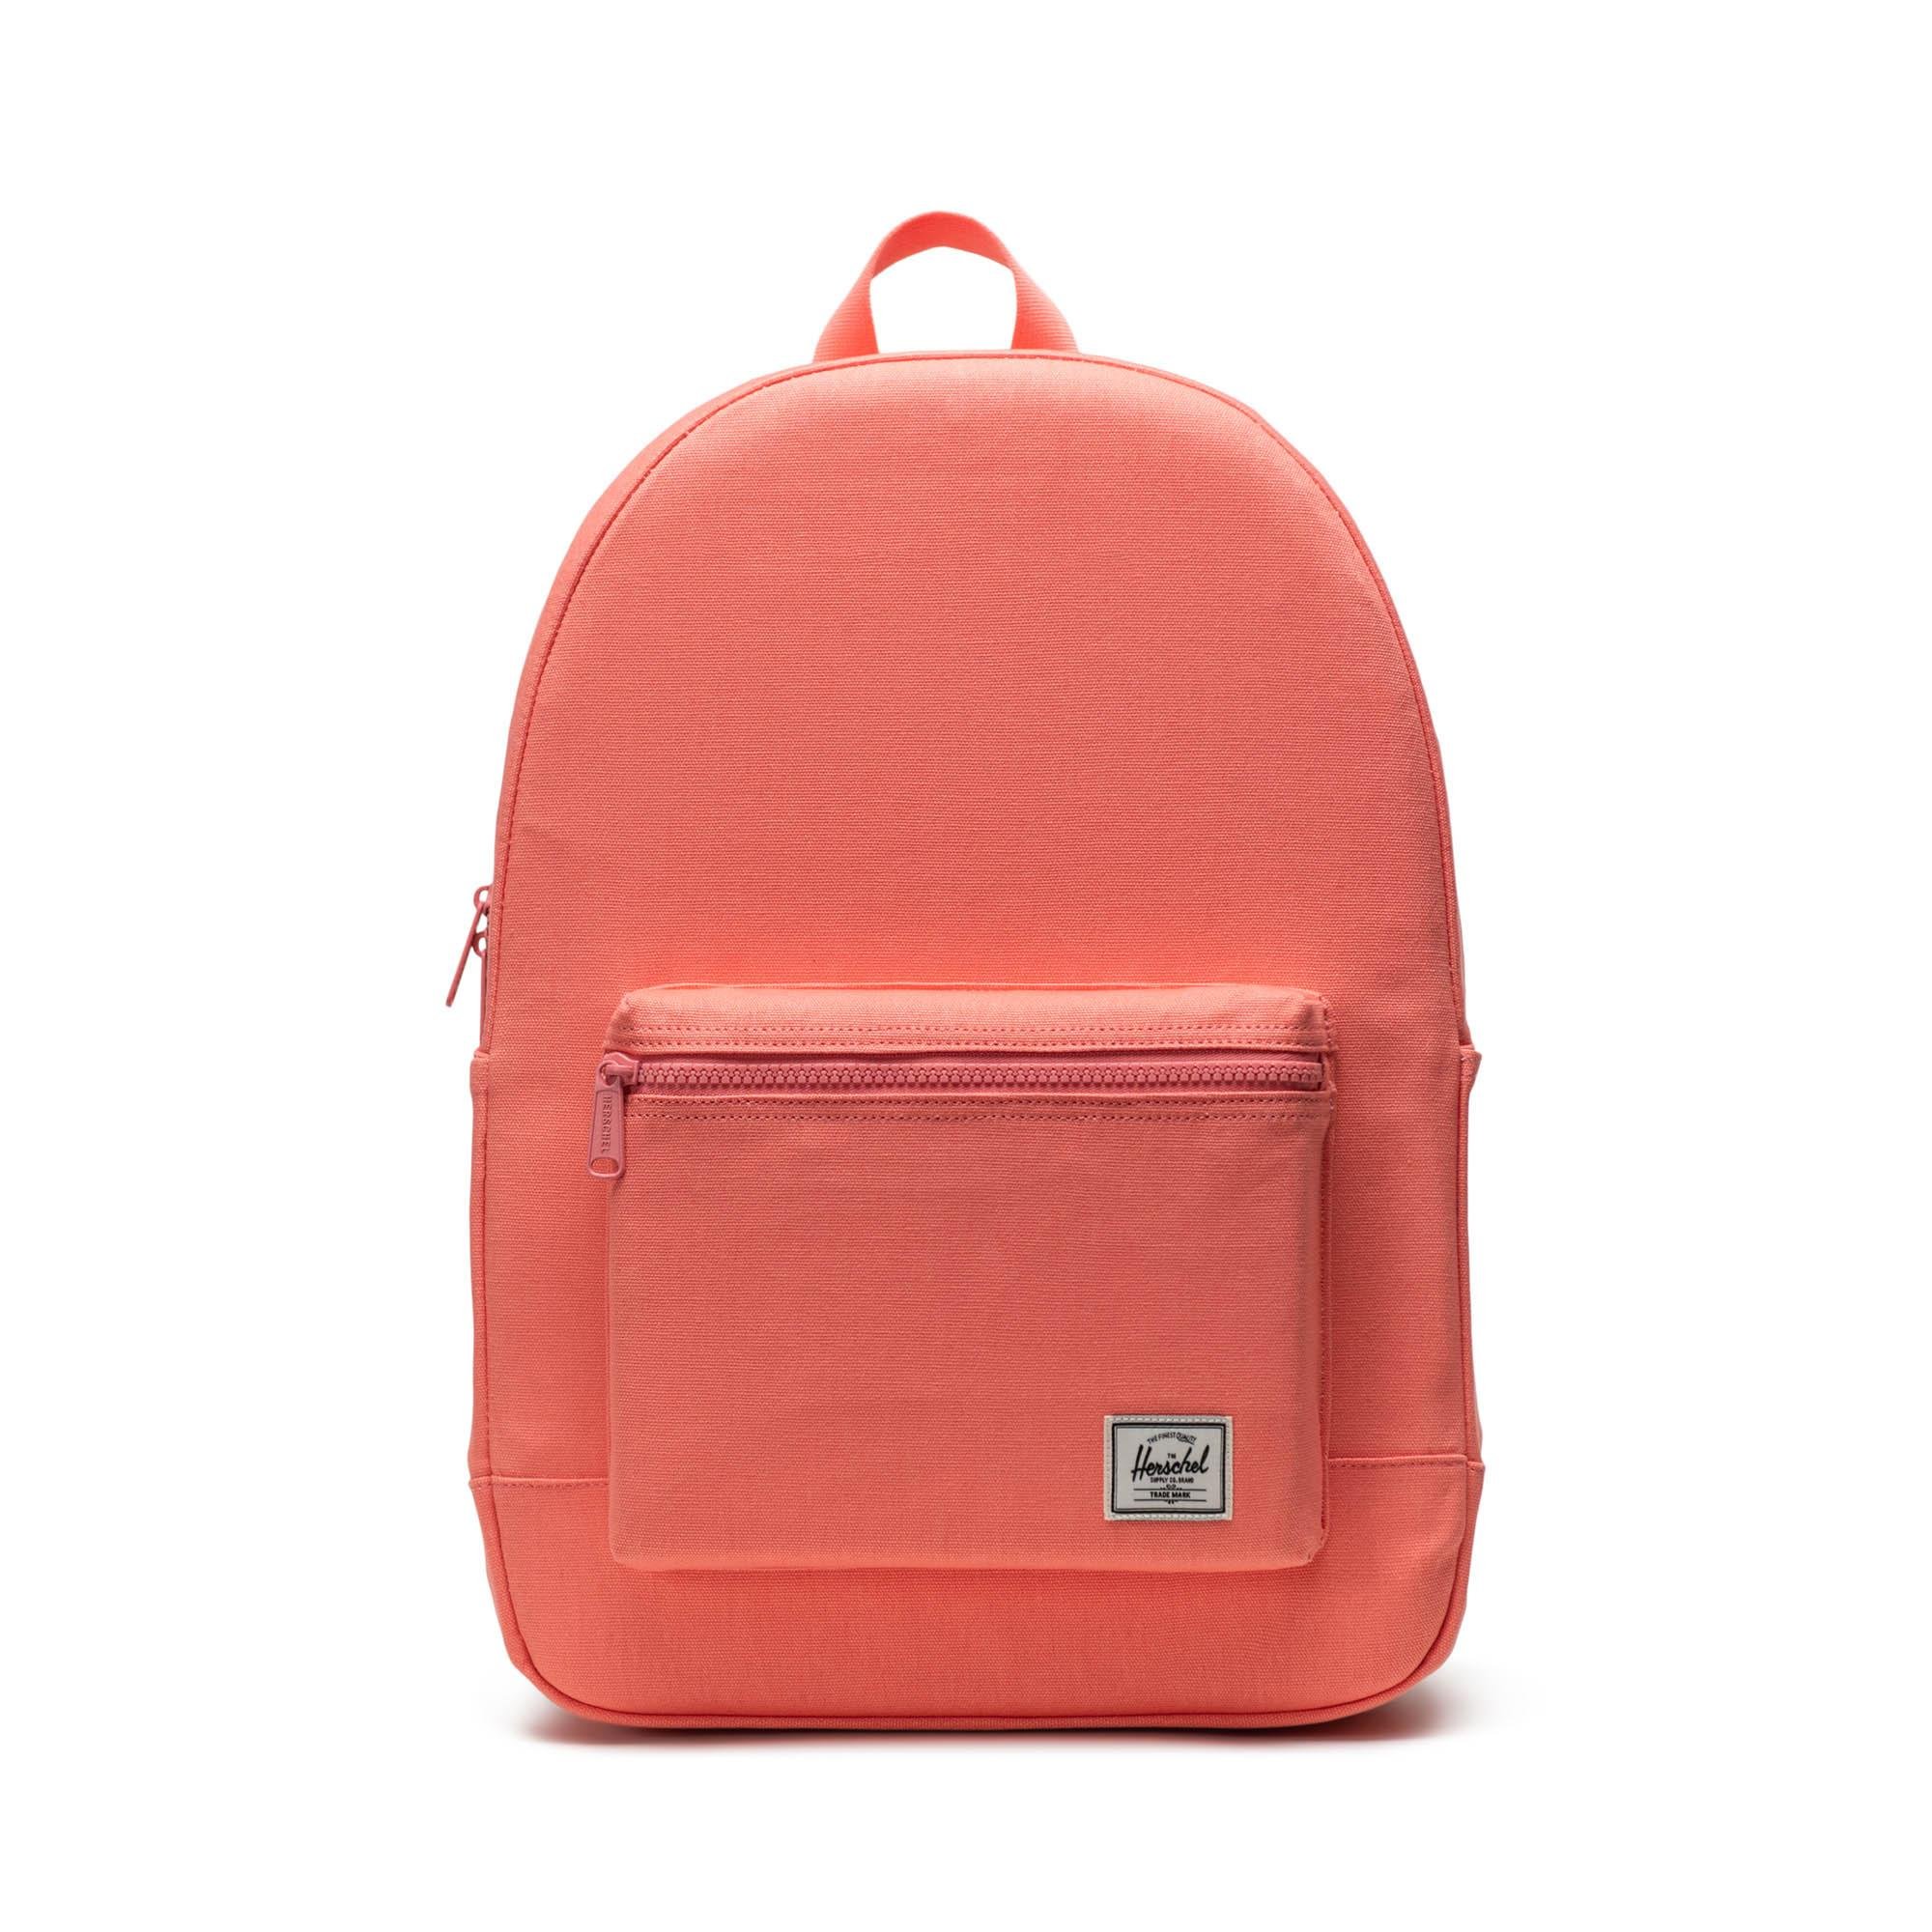 Pacific Daypack - 23.5L by HERSCHEL SUPPLY CO